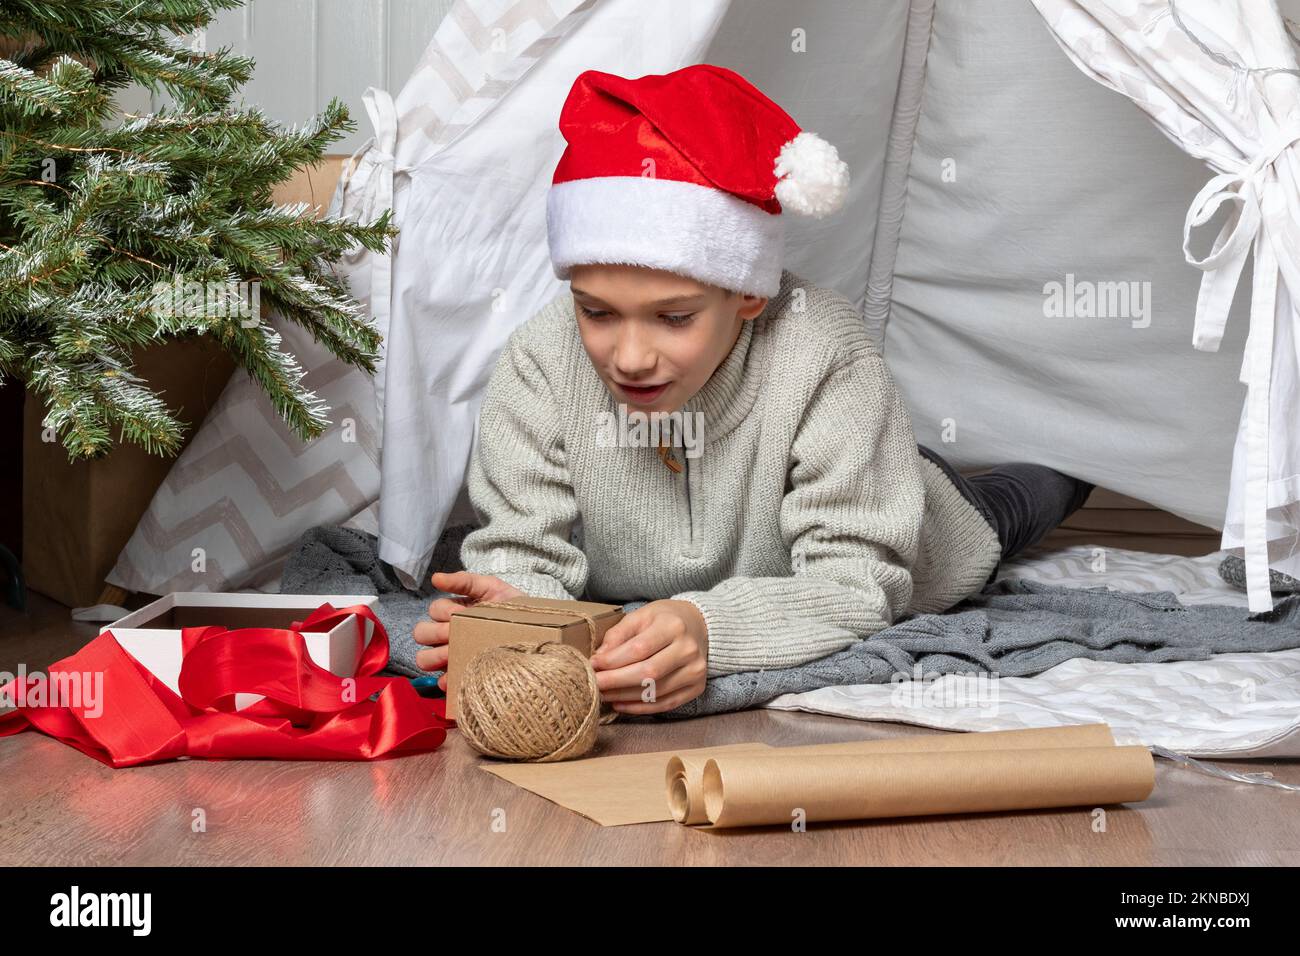 Family Christmas. Children open Christmas presents. A teenage boy in a Santa hat opens a gift and smiles while sitting on the floor of the house Stock Photo